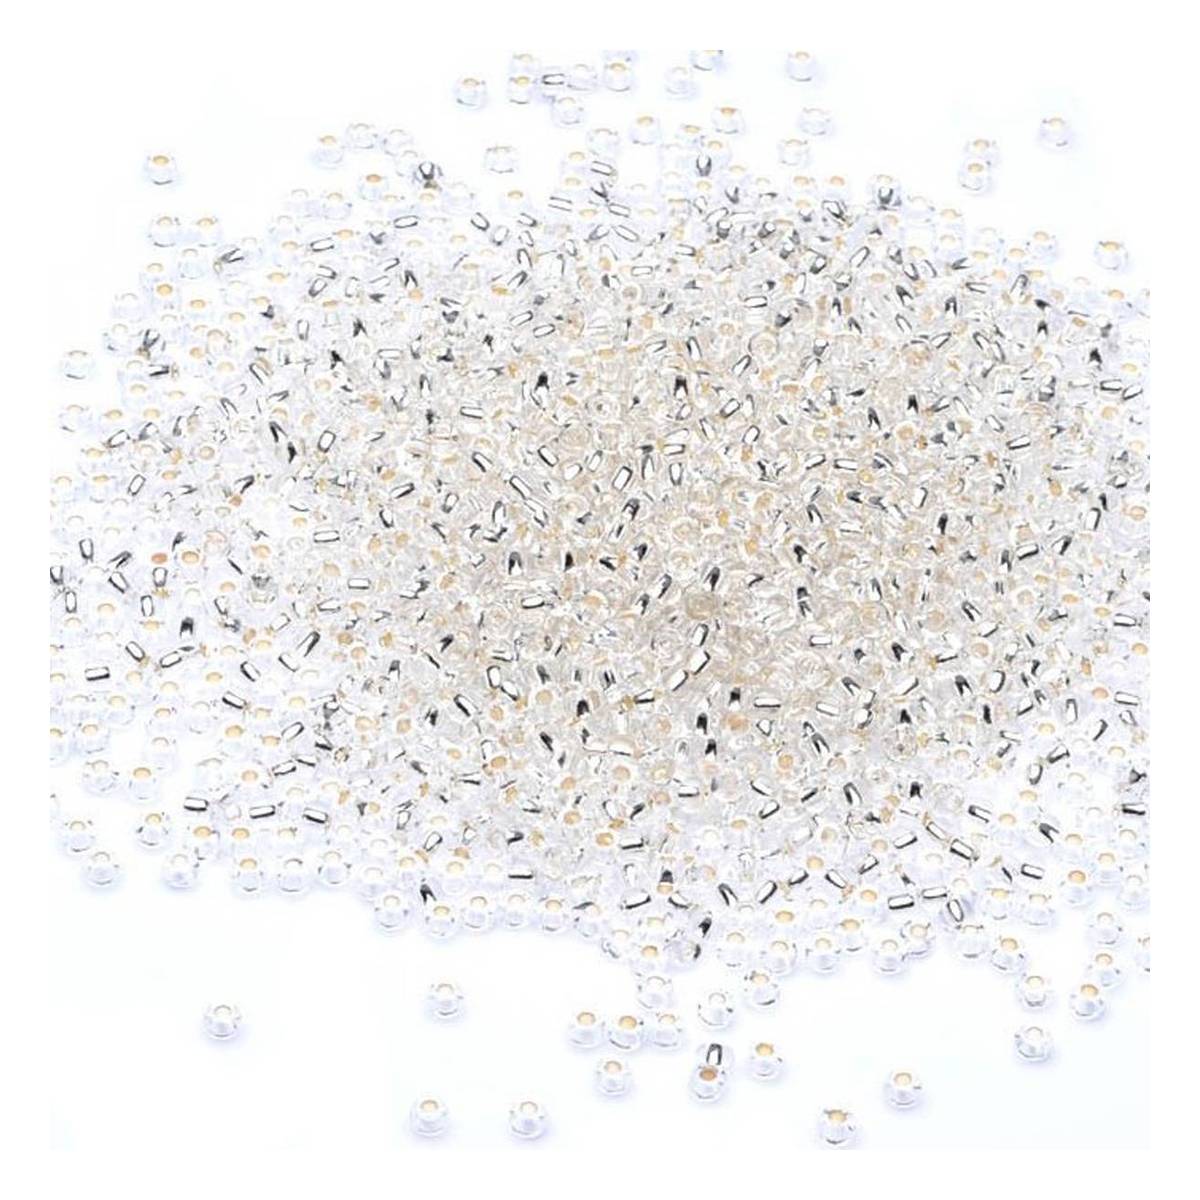 Beads Unlimited Silver Rocaille Beads 2.5mm x 3mm 50g